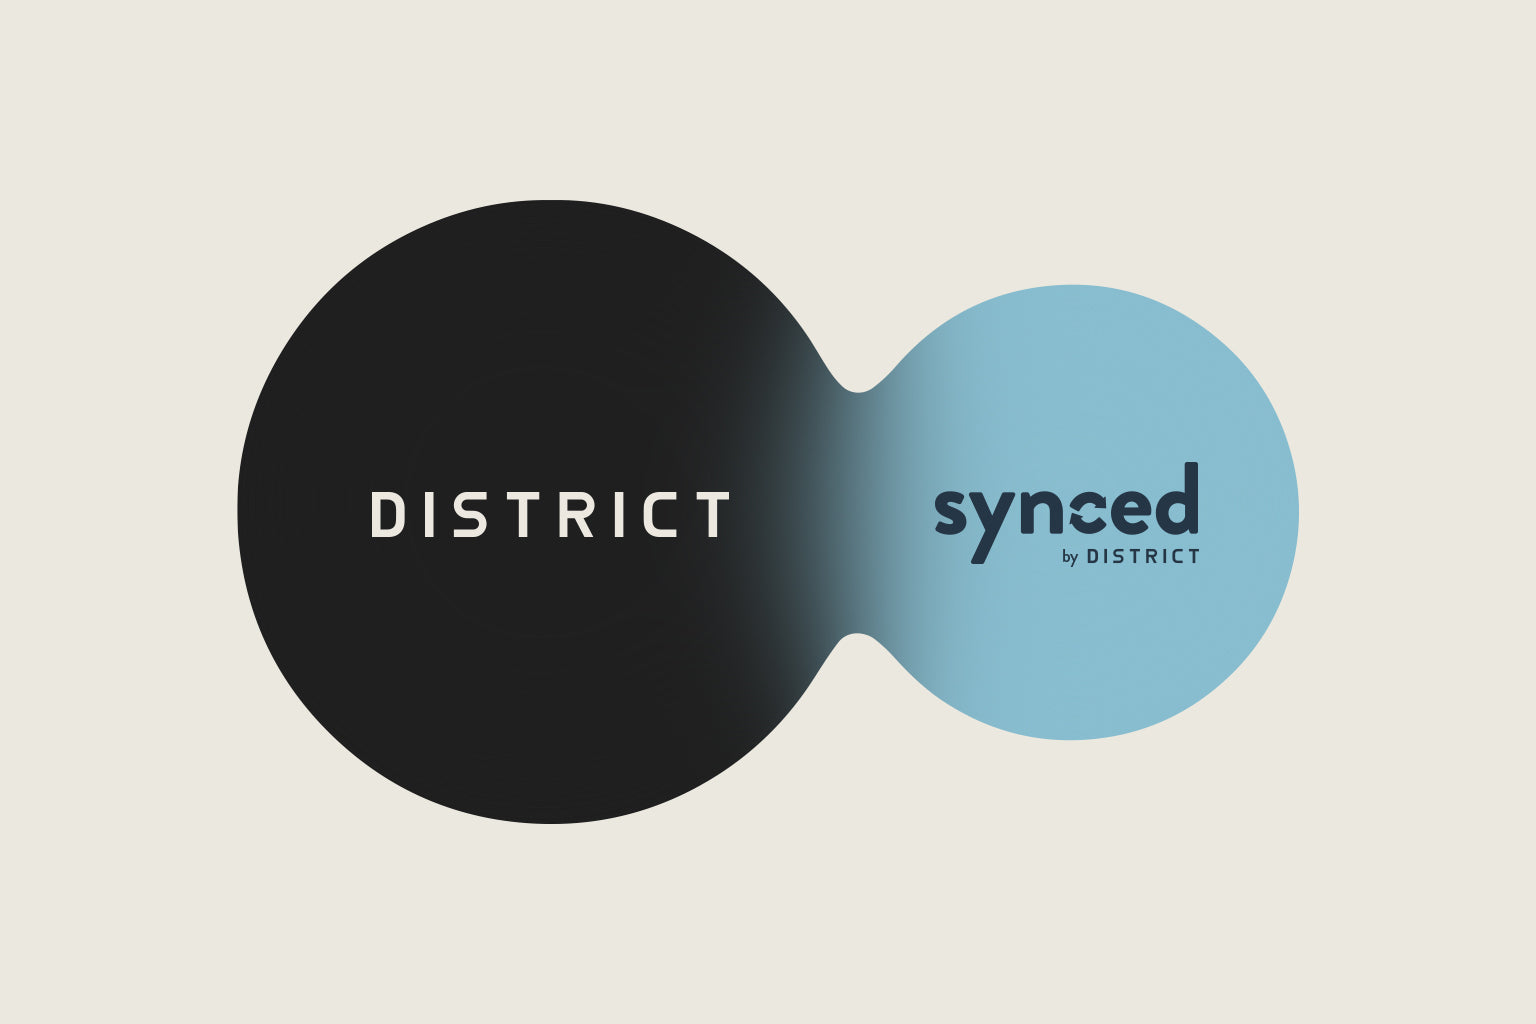 Introducing Synced by District